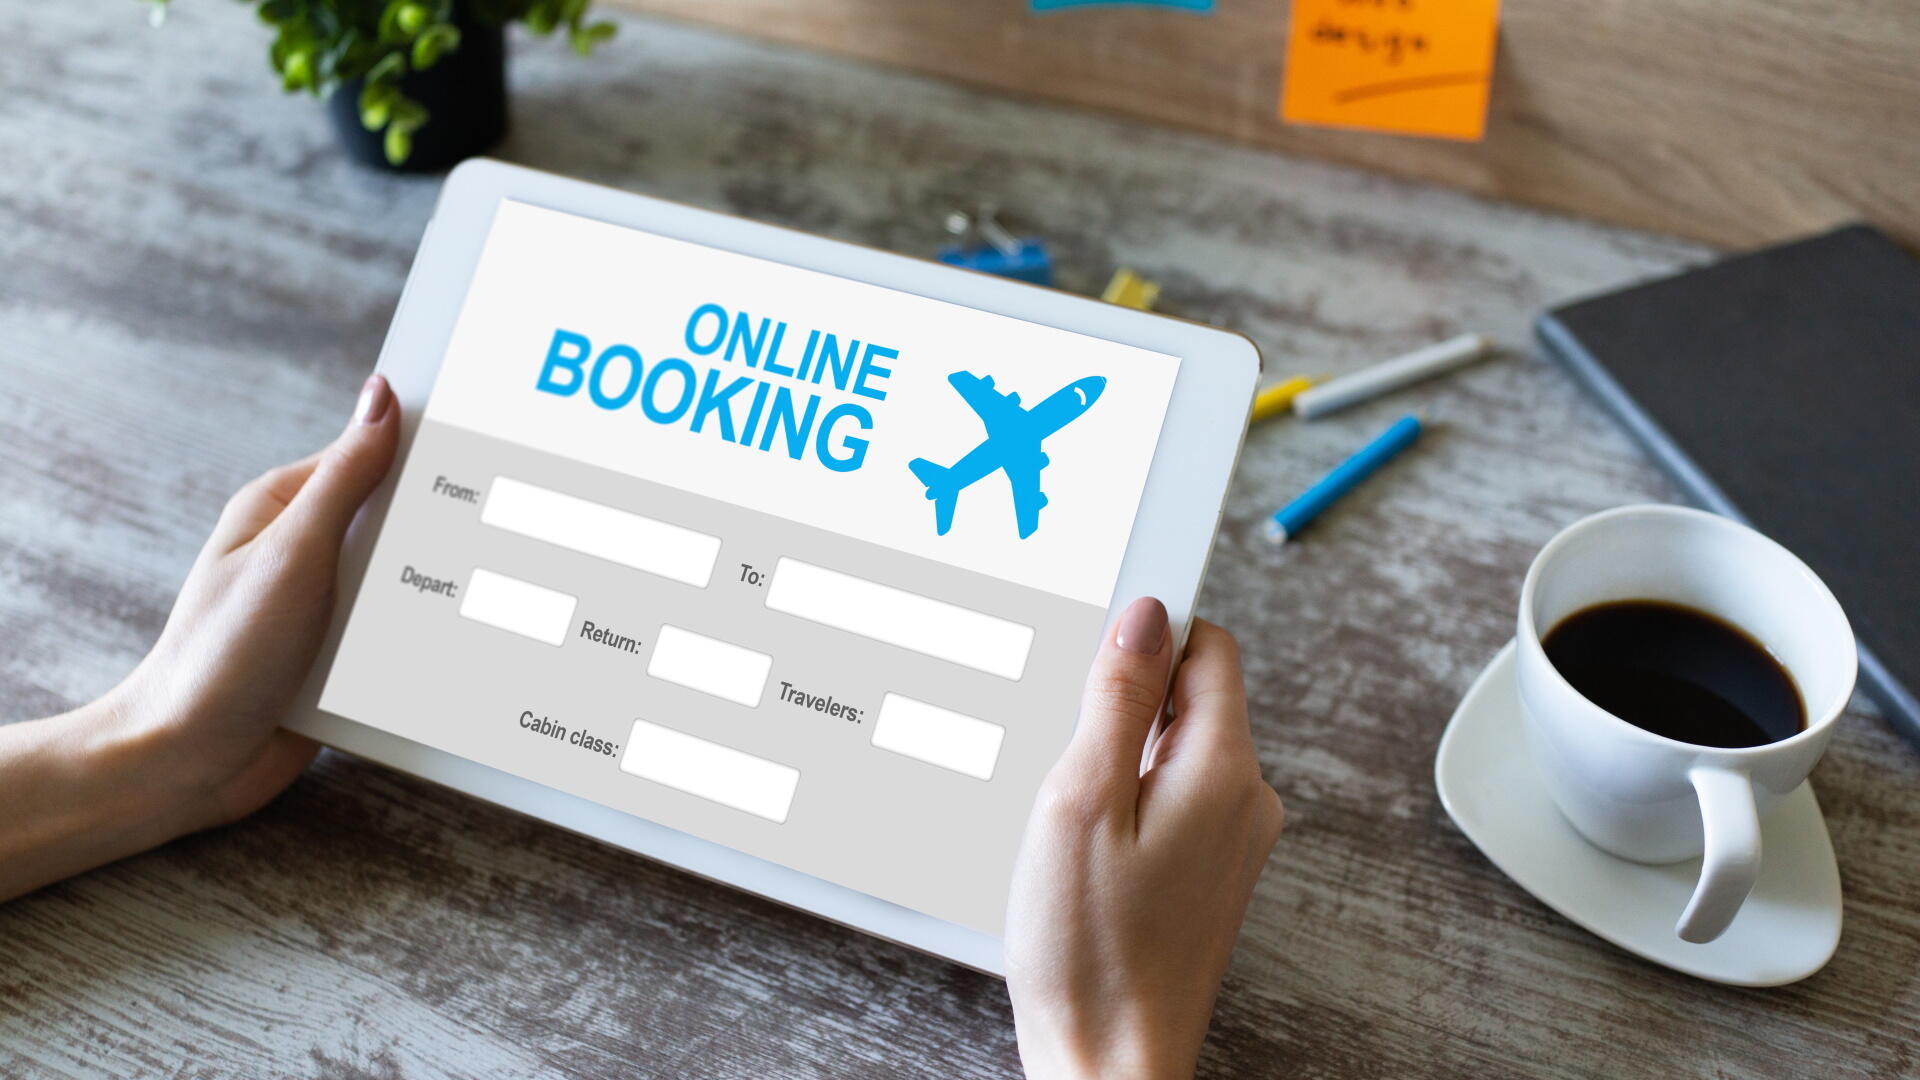 When purchasing airline tickets on a travel booking site, be sure to check the terms and conditions of the travel booking site and the airline in advance.